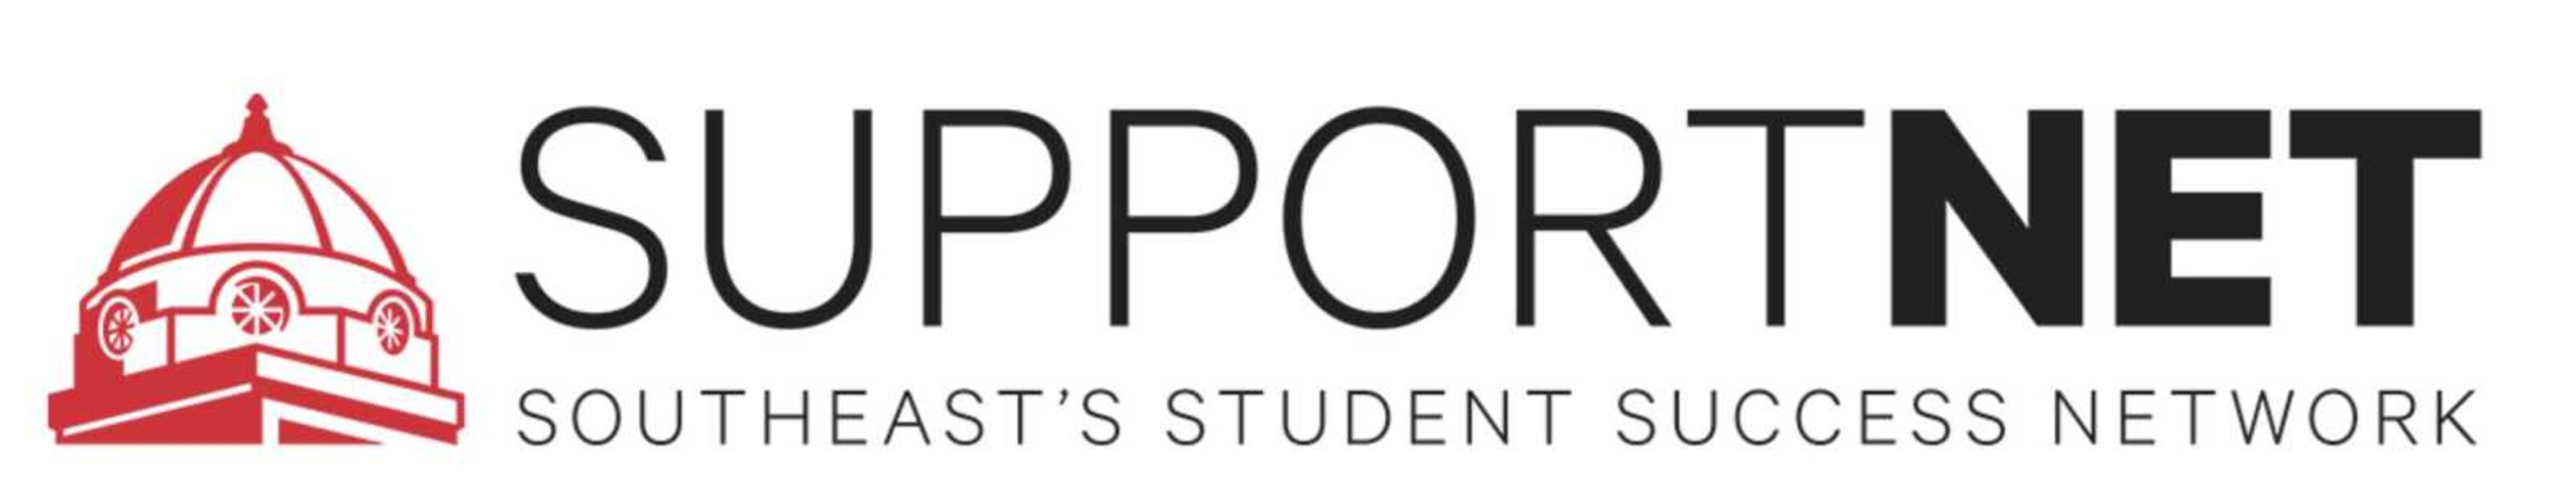 SupportNET helps strengthen campus communication